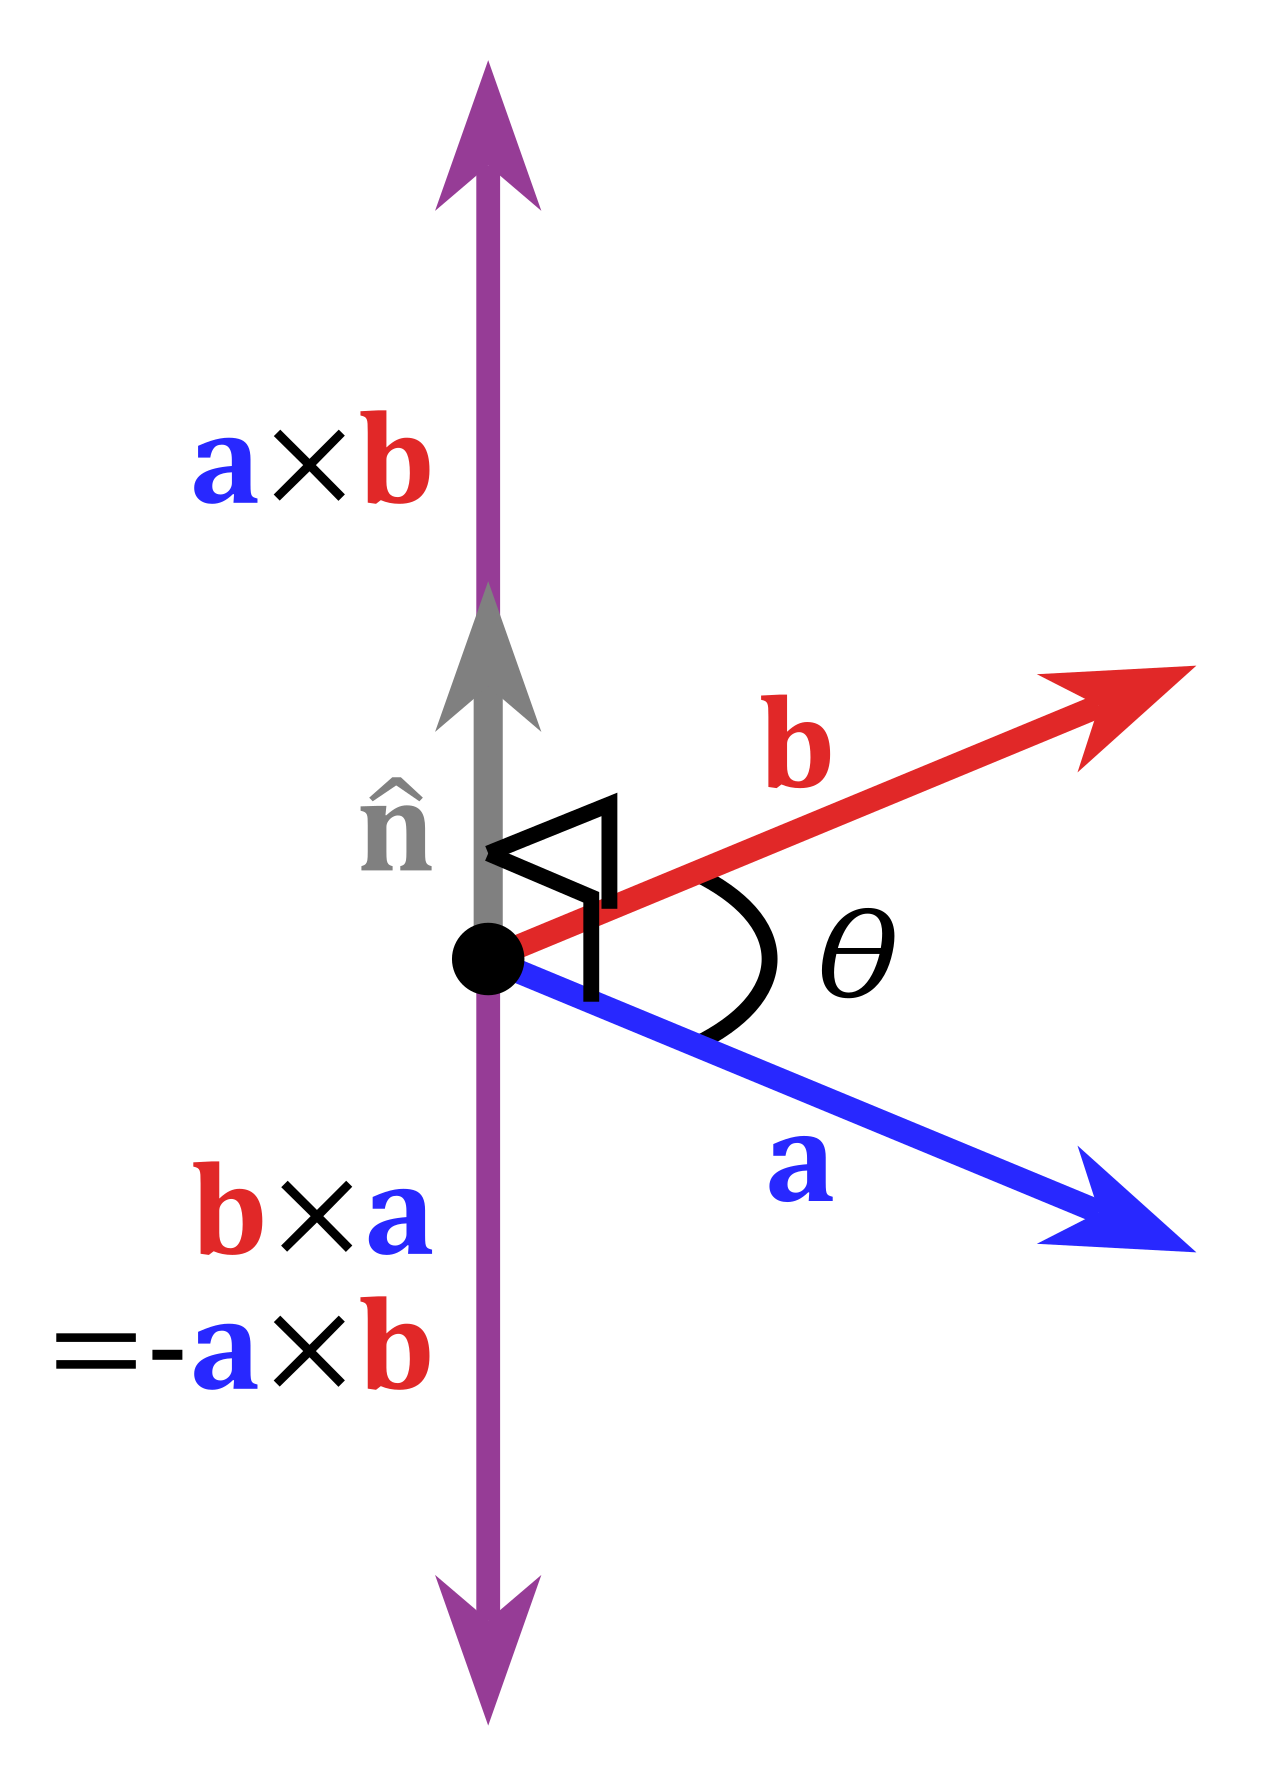 A visual example of the cross product